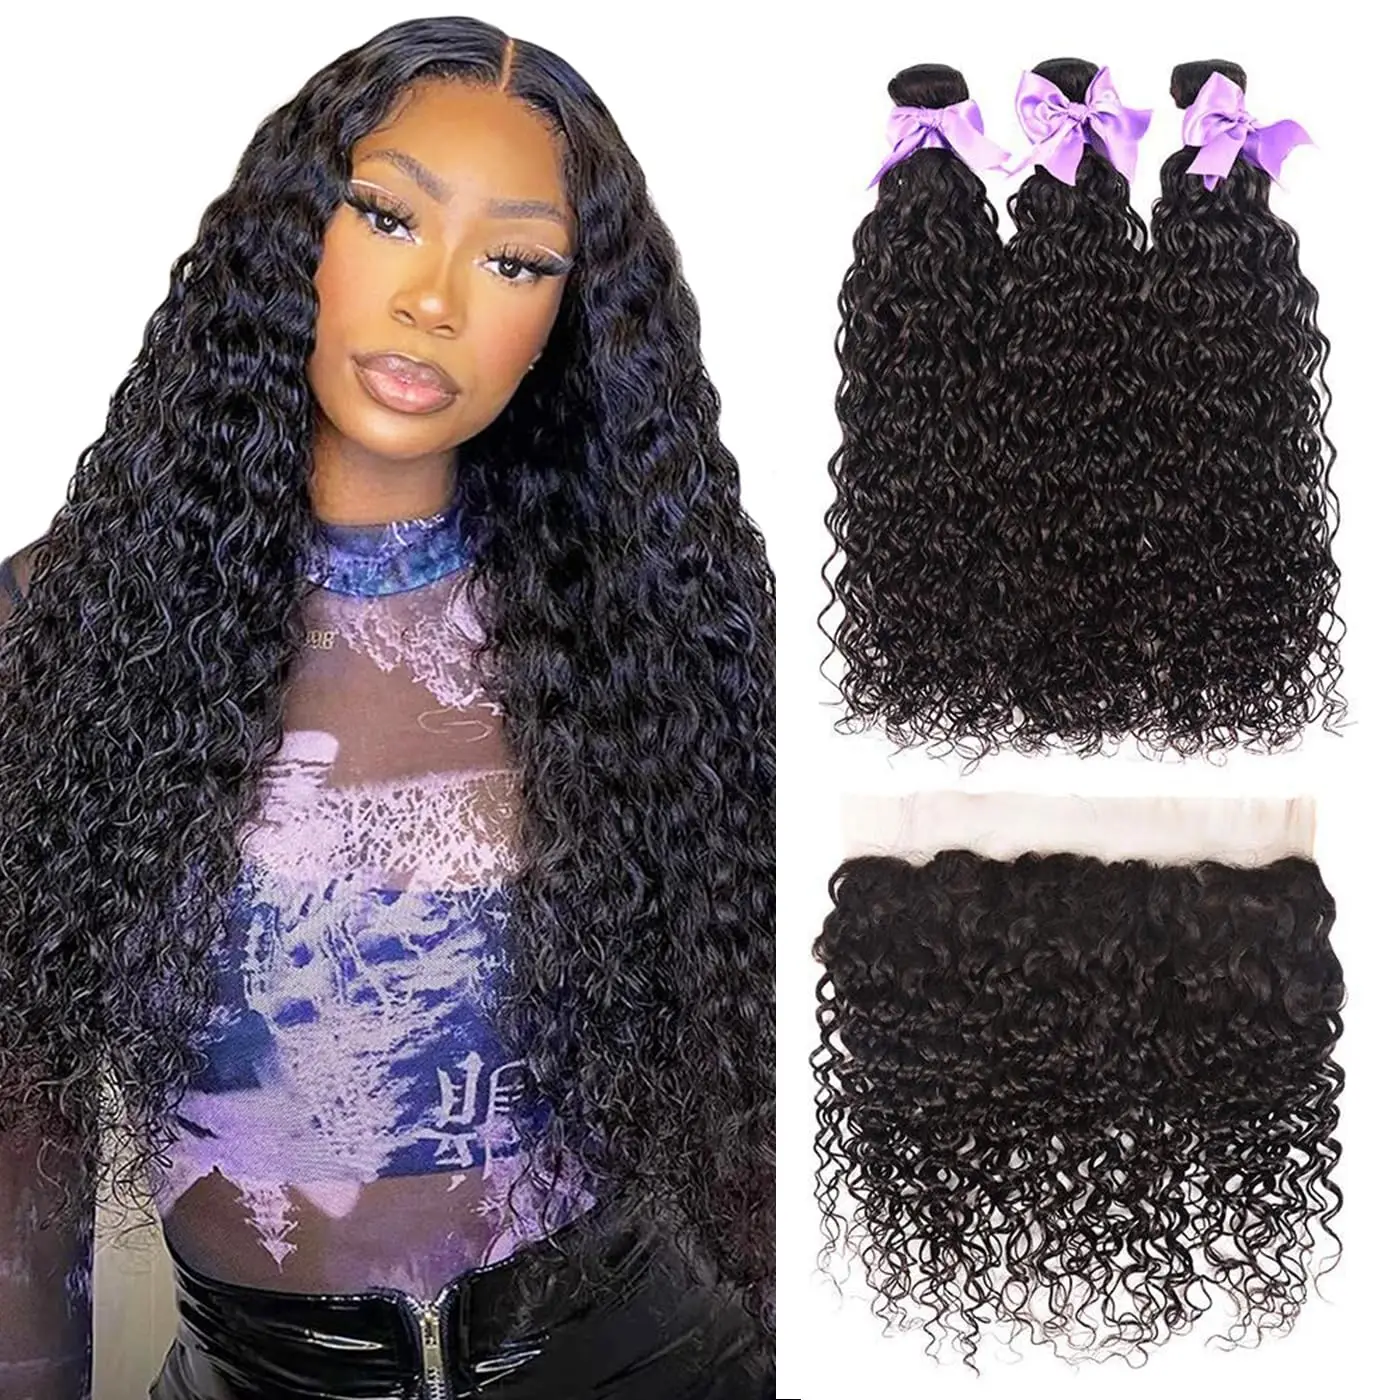 

Water Wave Bundles With Frontal Wet and Wavy Virgin Curly 100% Human Hair Bundles With Closure Brazilian Hair